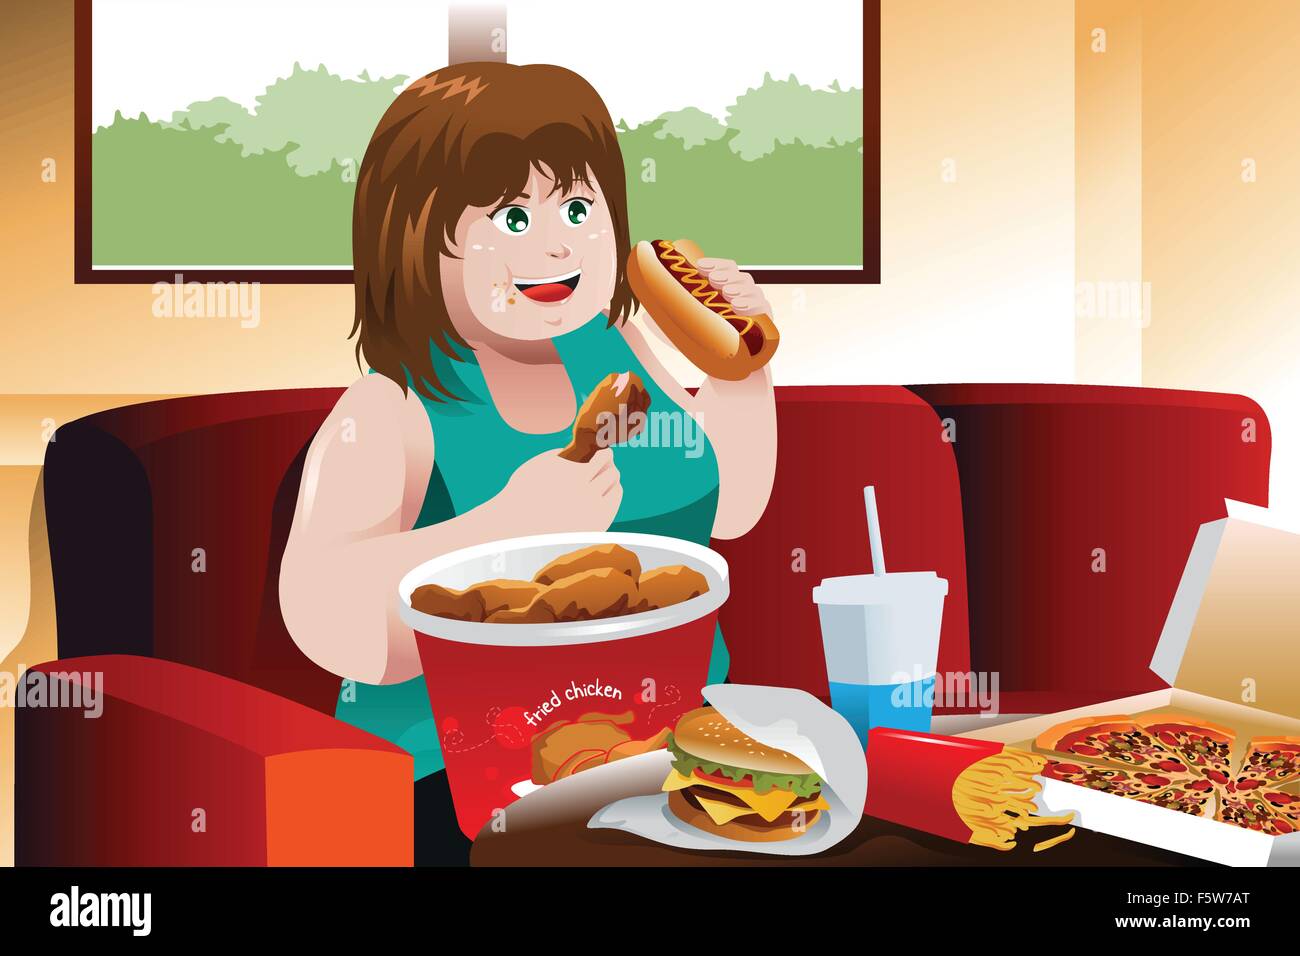 A vector illustration of overweight woman eating fast food Stock Vector